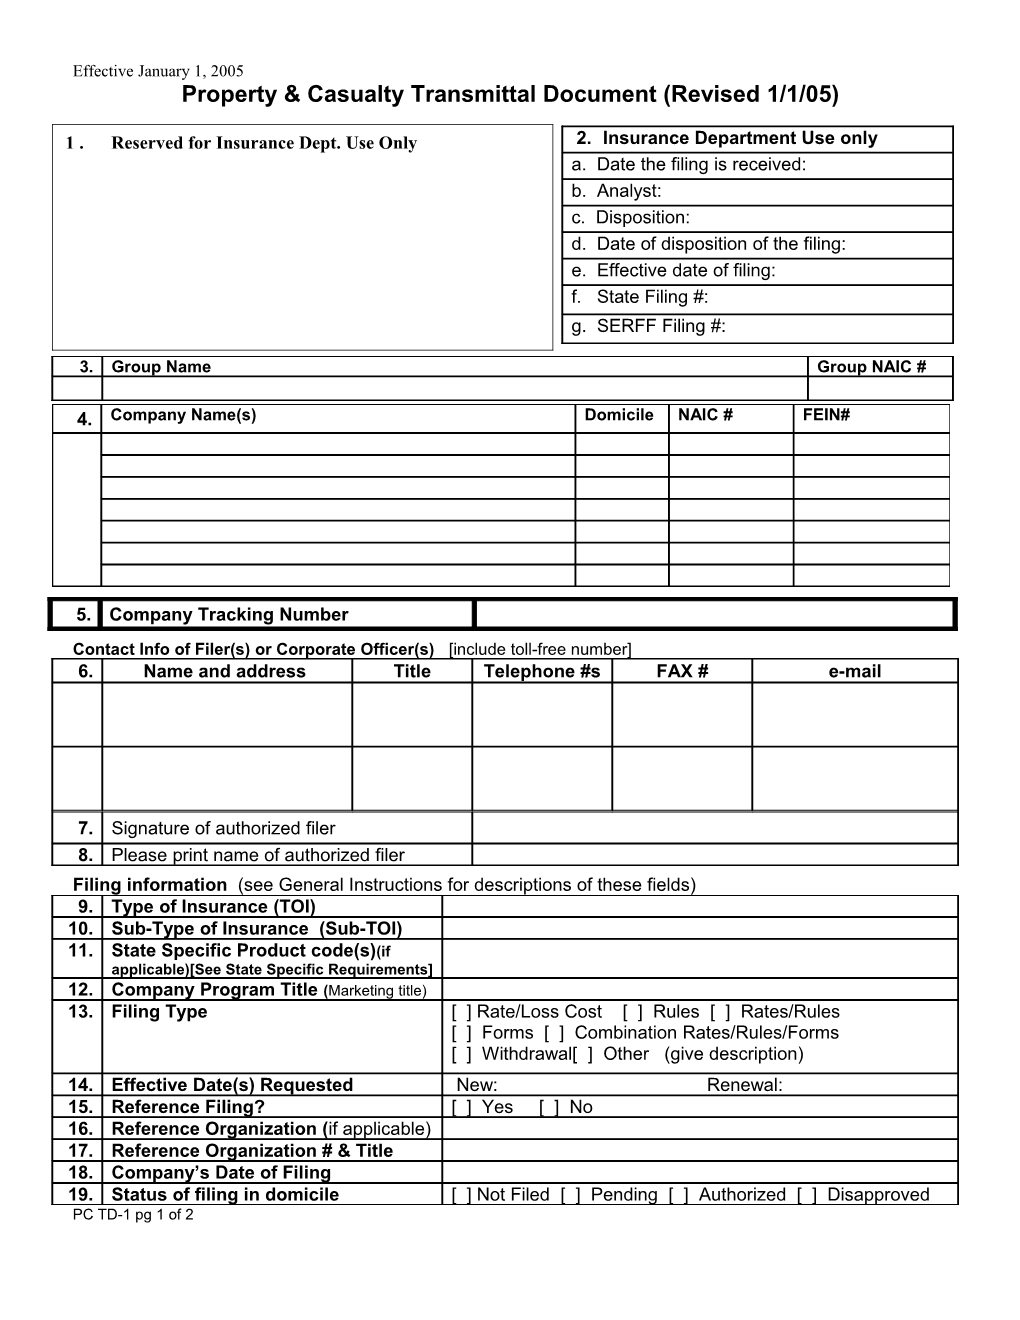 Property & Casualty Transmittal Document (Revised 1/1/04)